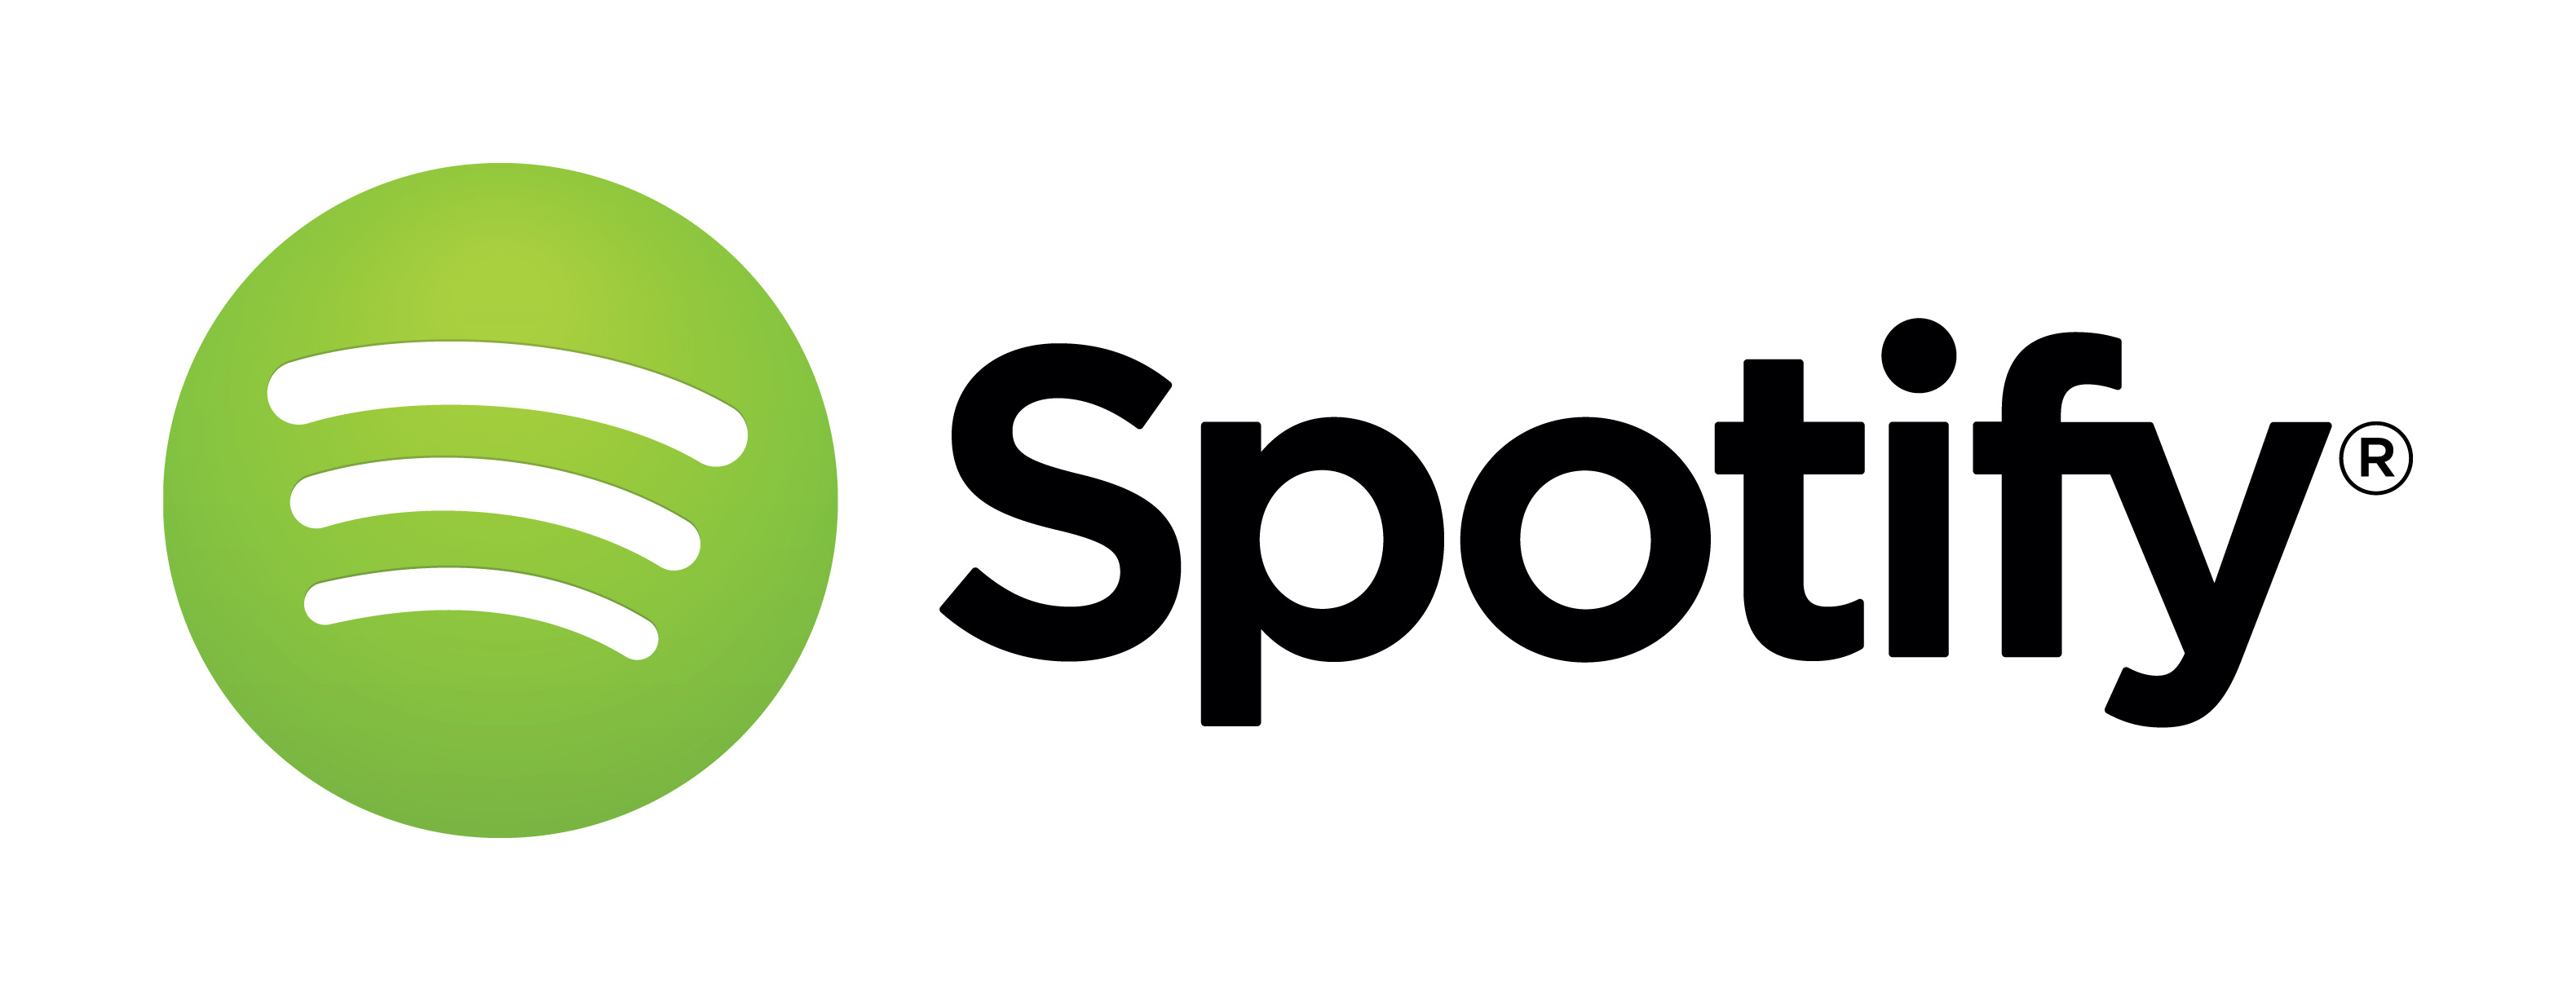 Spotify: 50 million songs in its catalog, Premium subscriber, Launch in 2006. 3160x1230 Dual Screen Wallpaper.